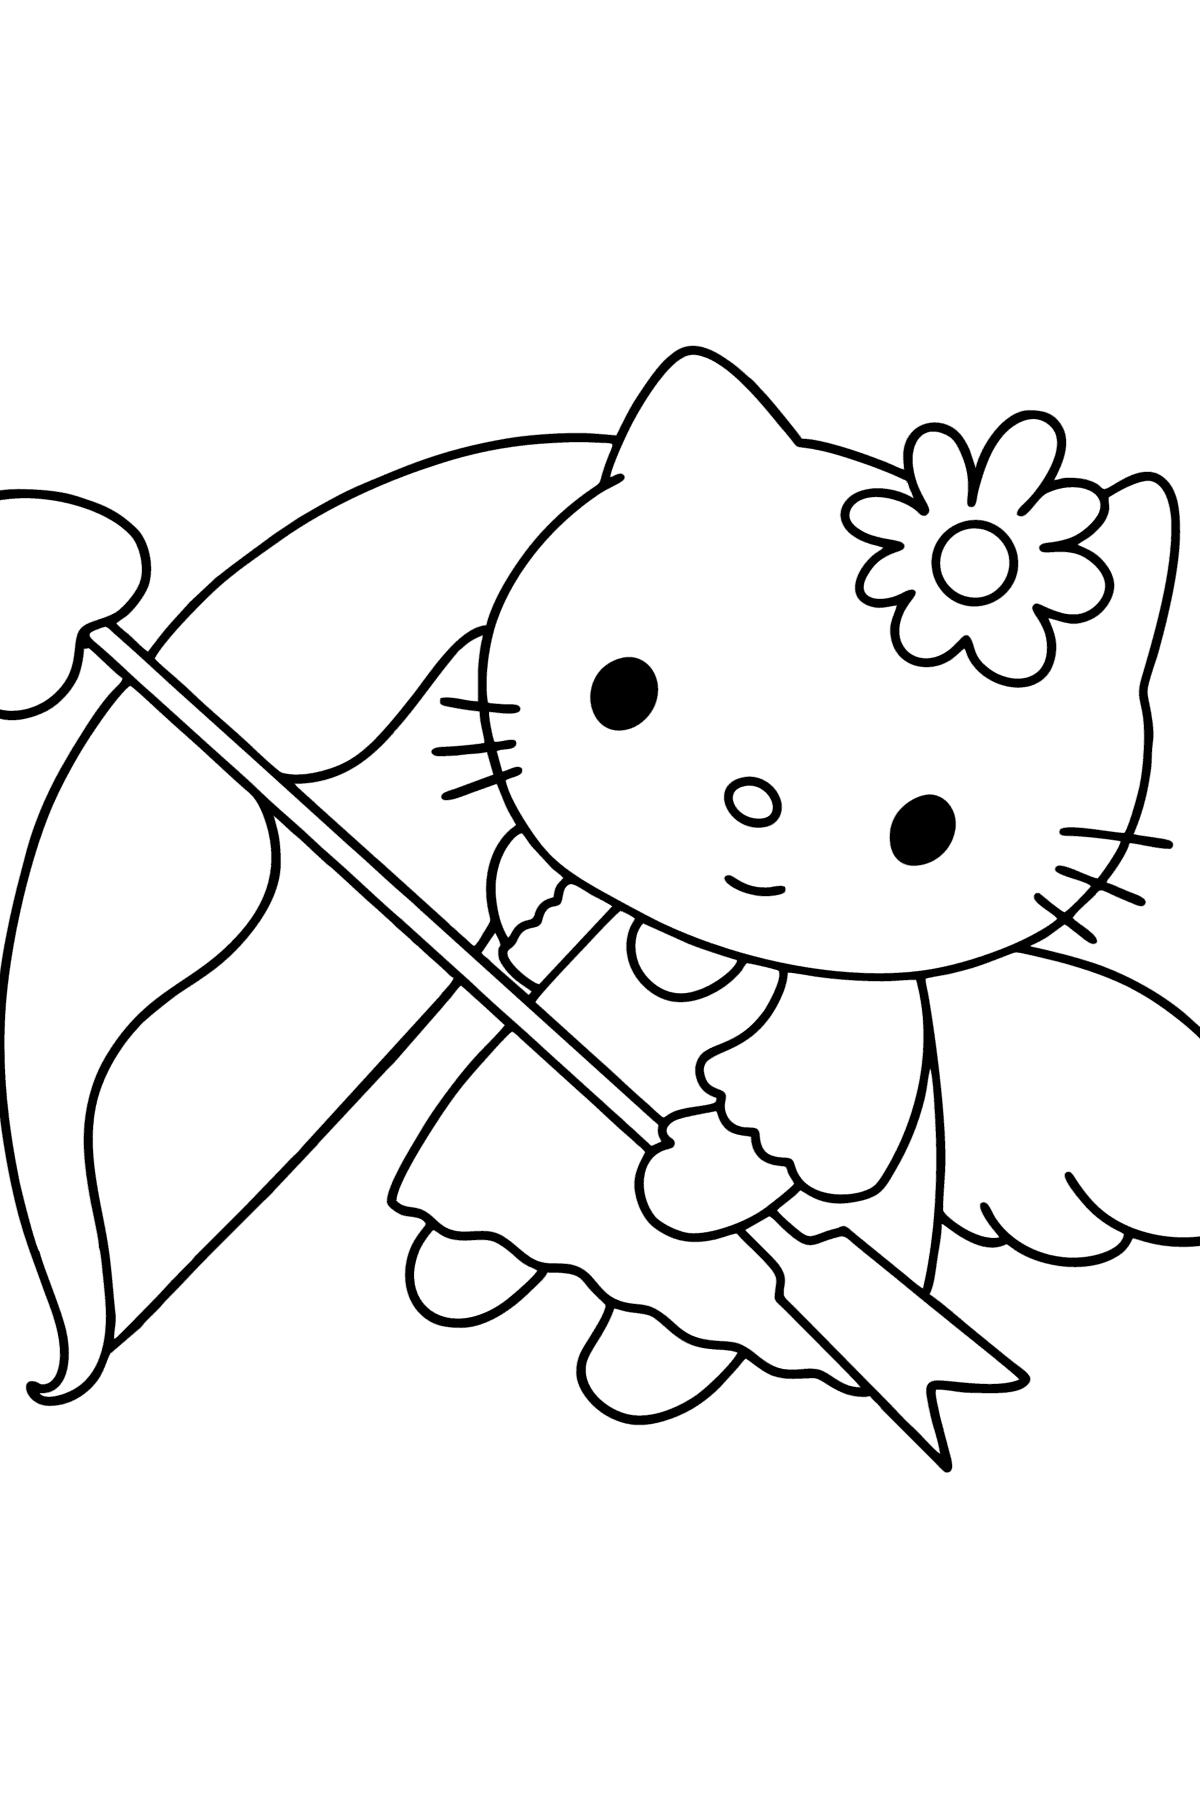 Hello Kitty on valentine's day coloring page - Coloring Pages for Kids